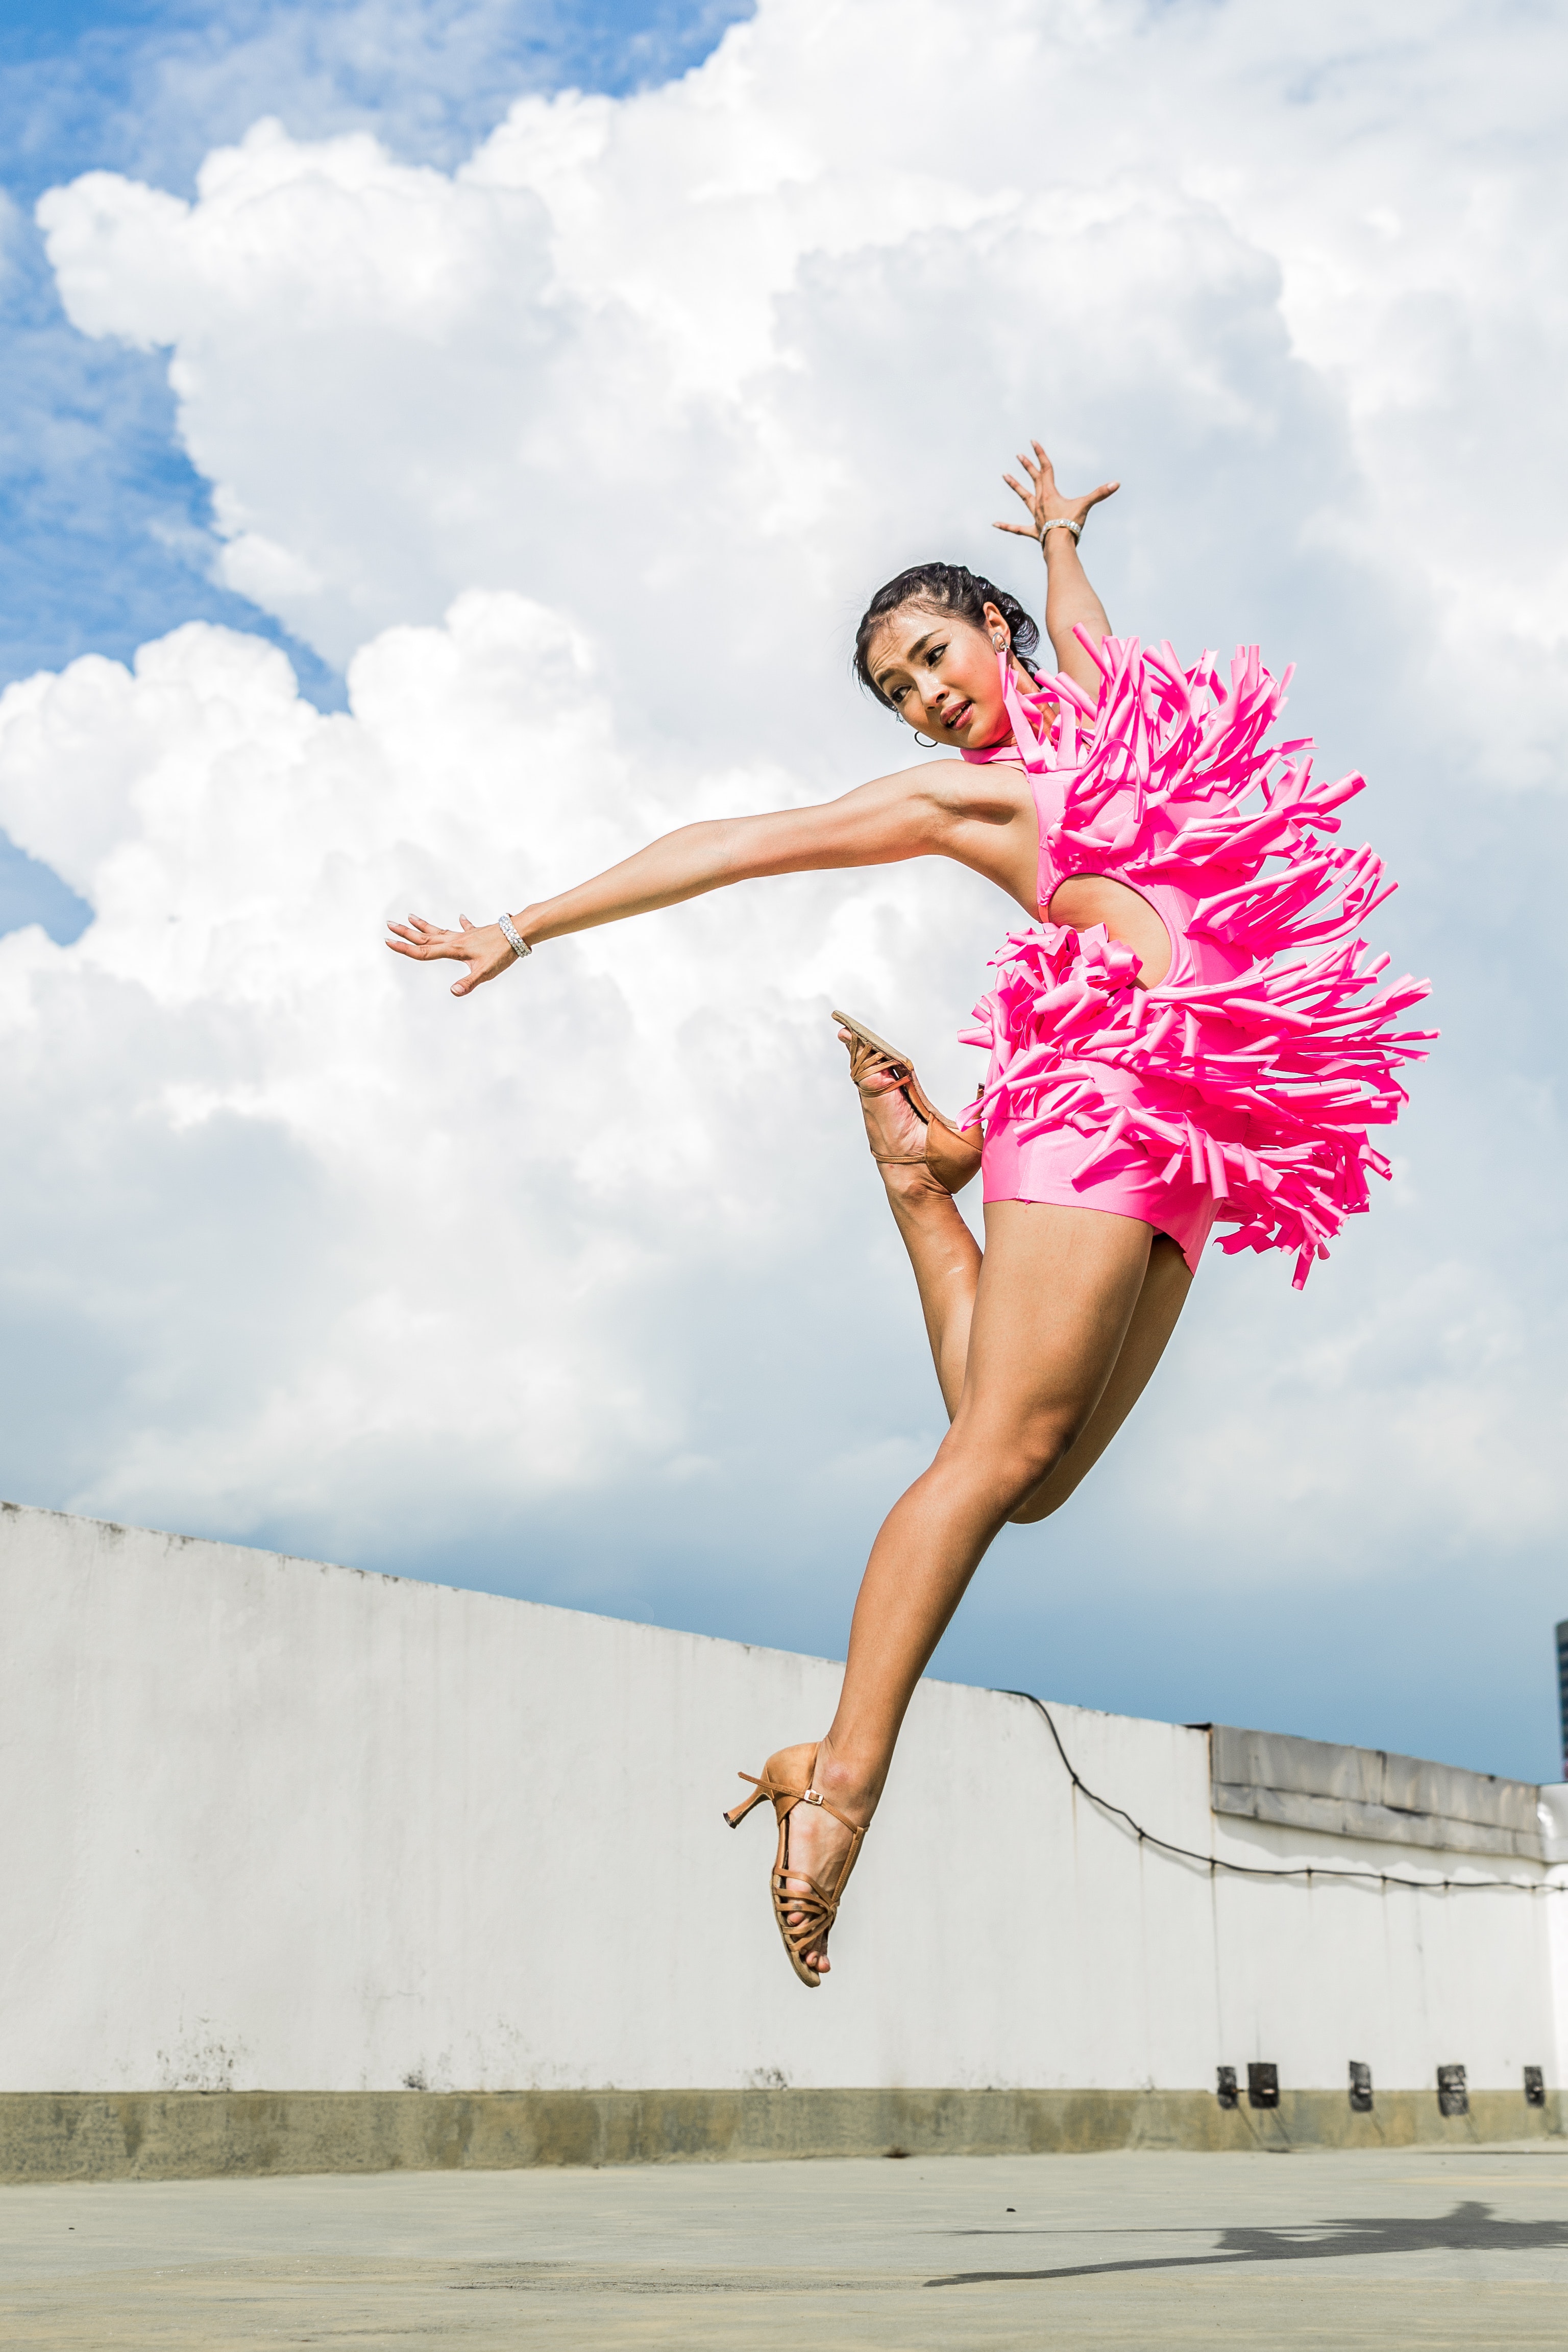 Woman in Pink Dress Doing Jump Shot While Extending Arms Under White Clouds, Active, Joy, Wear, Summer, HQ Photo